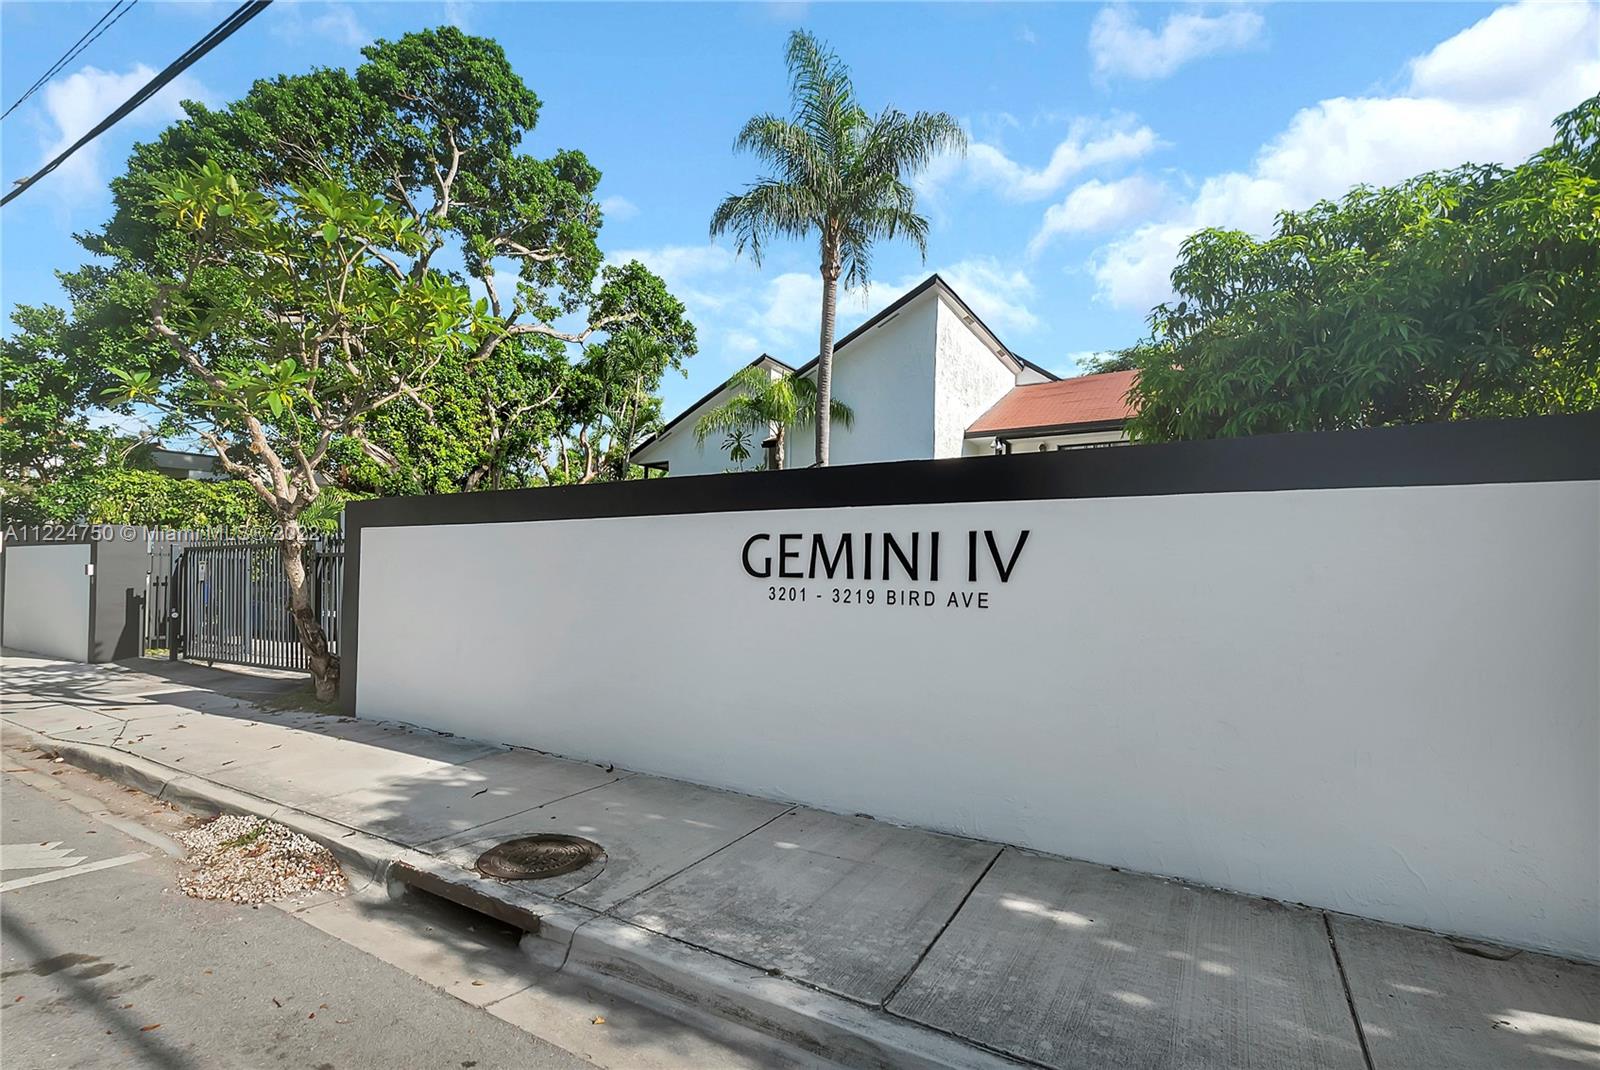 Fantastic opportunity to live the Coconut Grove lifestyle in this 2 bedroom townhouse with beautiful community pool.  Walk to everything the Grove has to offer in this spacious unit with 2 gated parking and lovely private patio.  Updated unit with impact windows, tile floors throughout with stainless steel 
appliances.  Do not miss this great unit in an amazing neighborhood.  Tenant occupied till end of July.